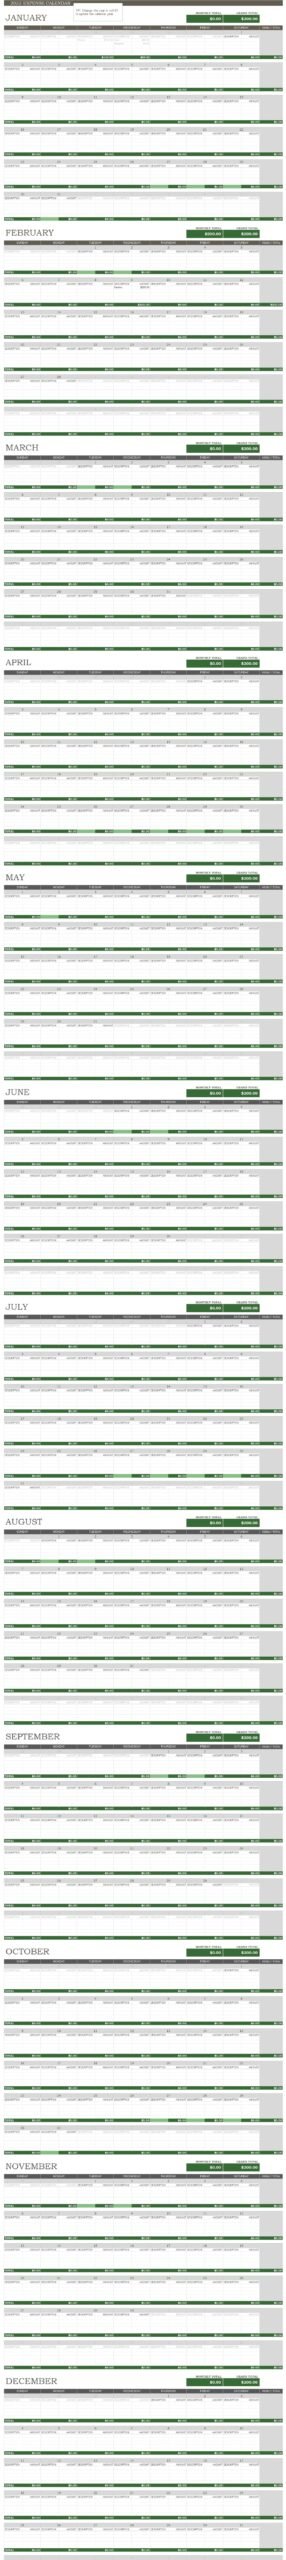 Any Year Expense Calendar Template In Excel (Download.xlsx)